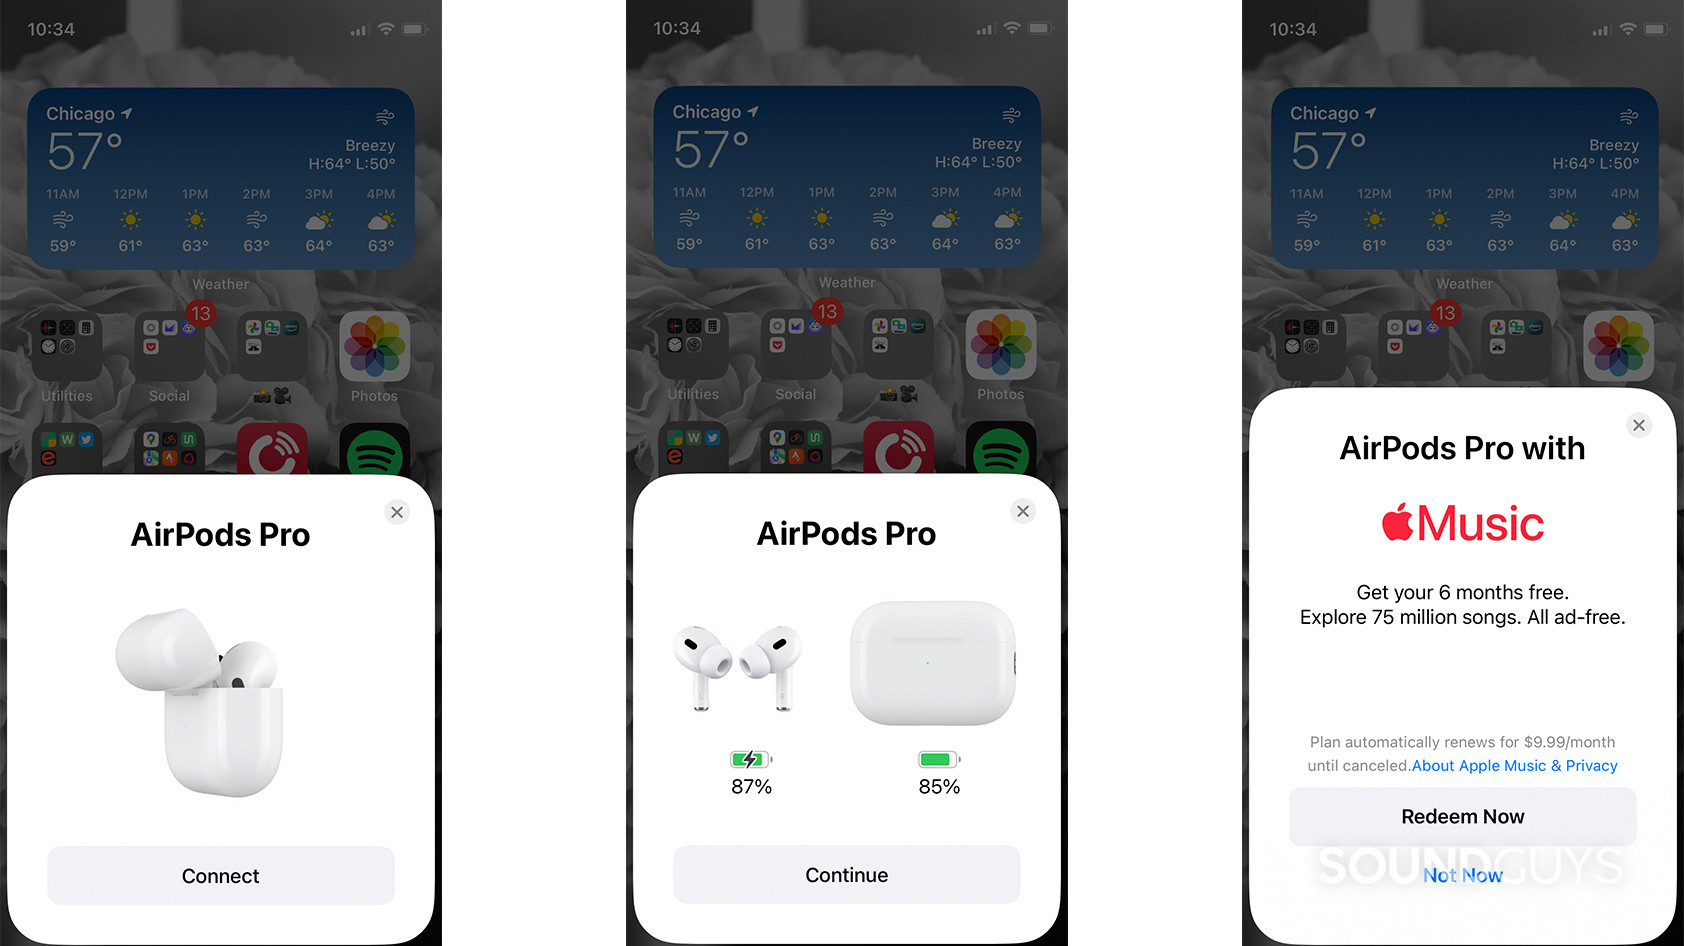 10 Ways To Spot the Fake Apple AirPods 2! – Redskull